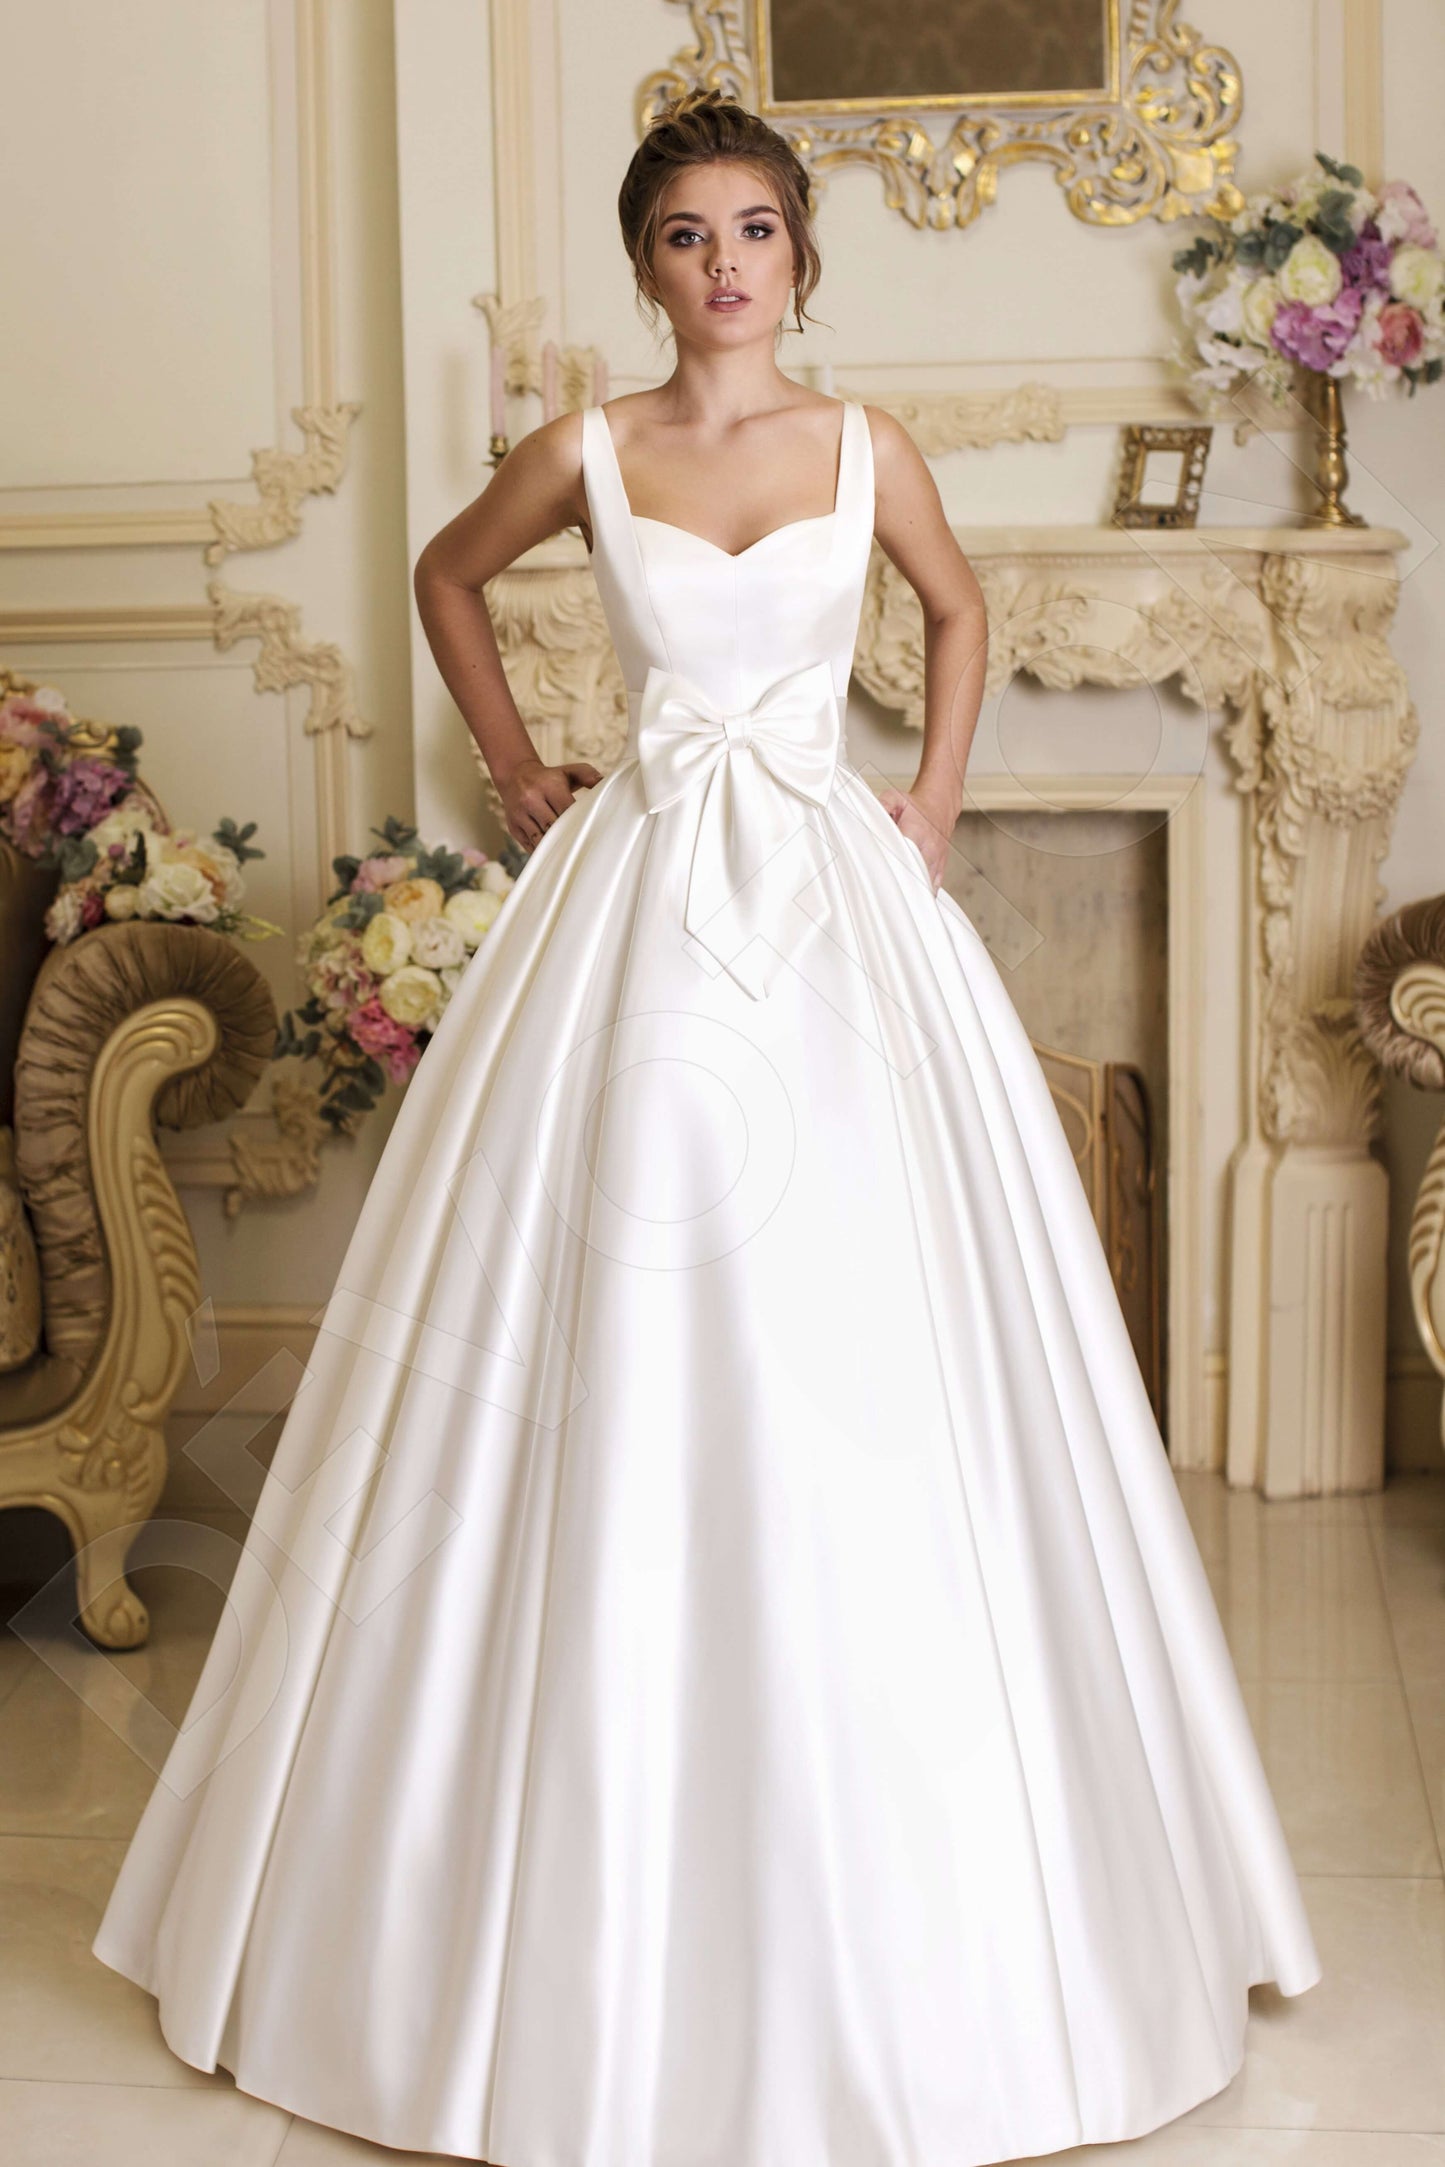 Trixie Full back Princess/Ball Gown Sleeveless Wedding Dress Front